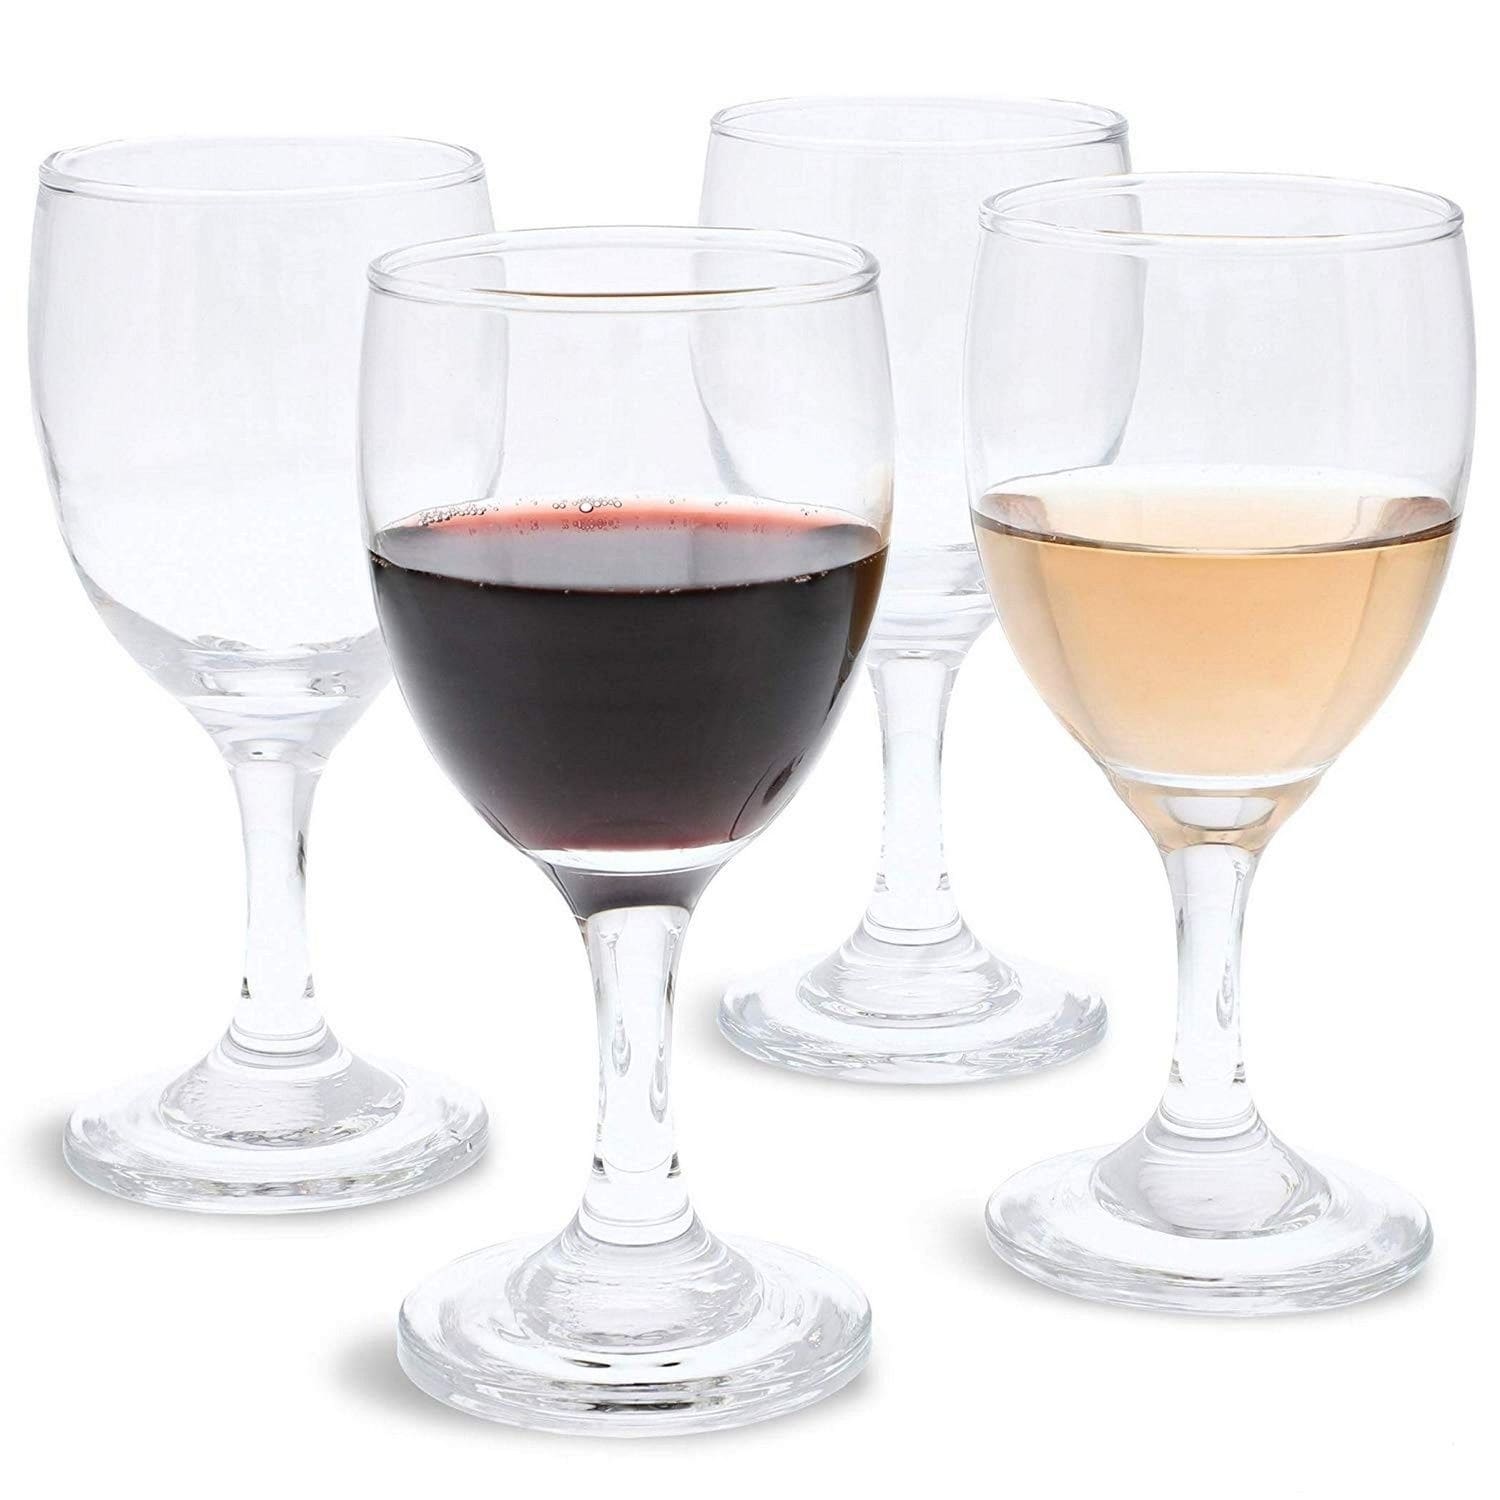 https://ak1.ostkcdn.com/images/products/30100835/Juvale-Set-of-4-Small-Clear-Glass-Stemmed-Wine-Glasses-4.5-Ounces-537a0a4e-9624-44a0-9073-cf5c87d1b49e.jpg